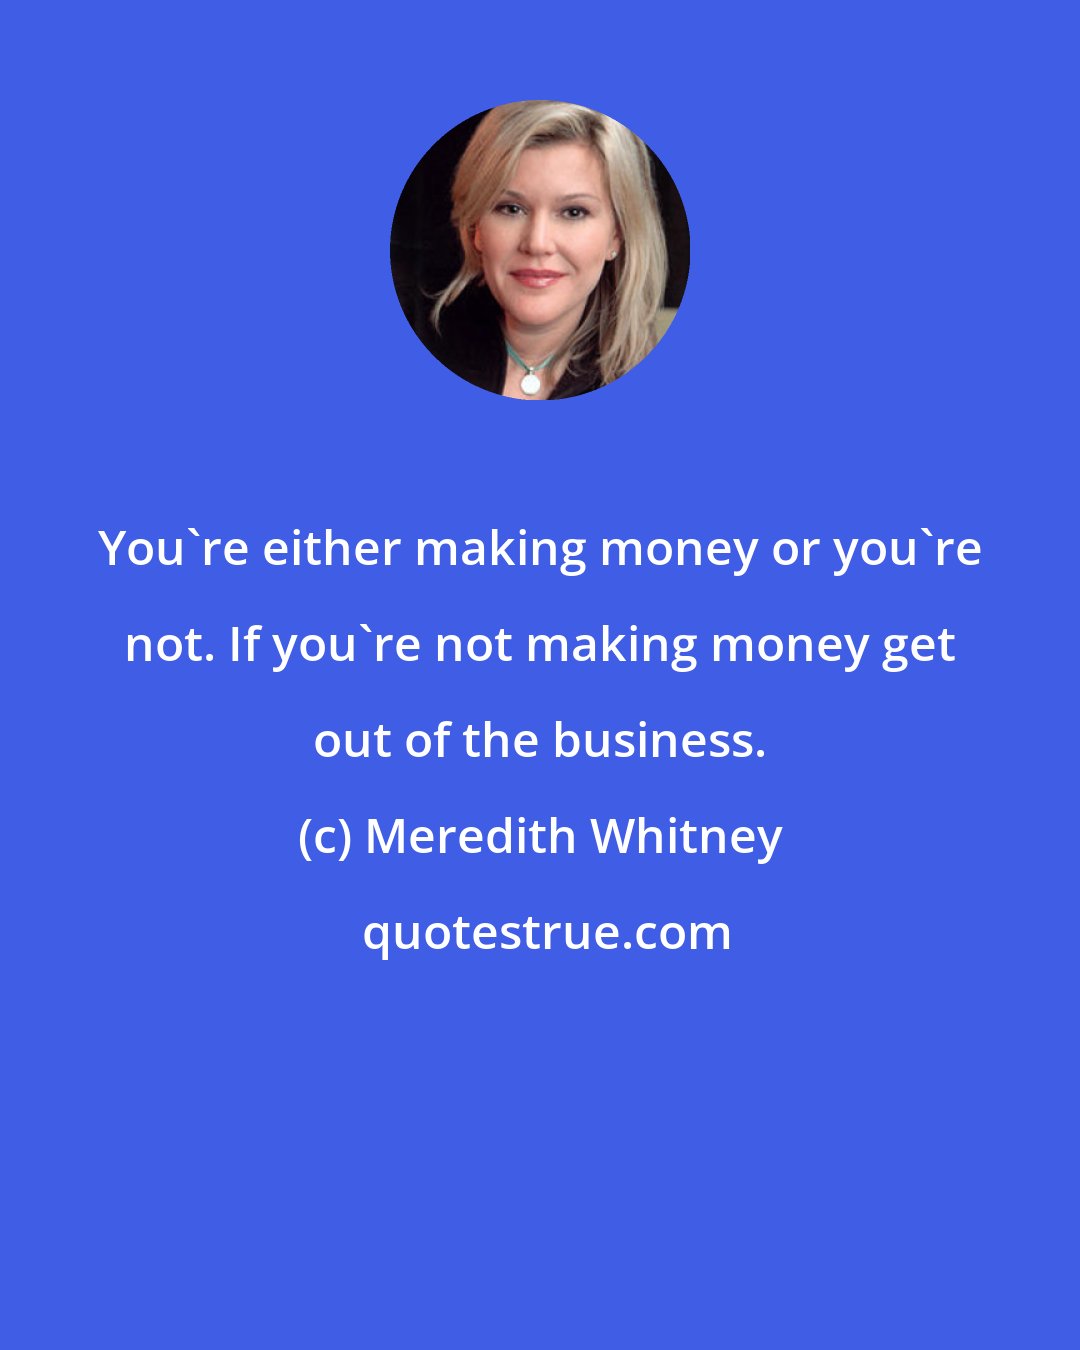 Meredith Whitney: You're either making money or you're not. If you're not making money get out of the business.